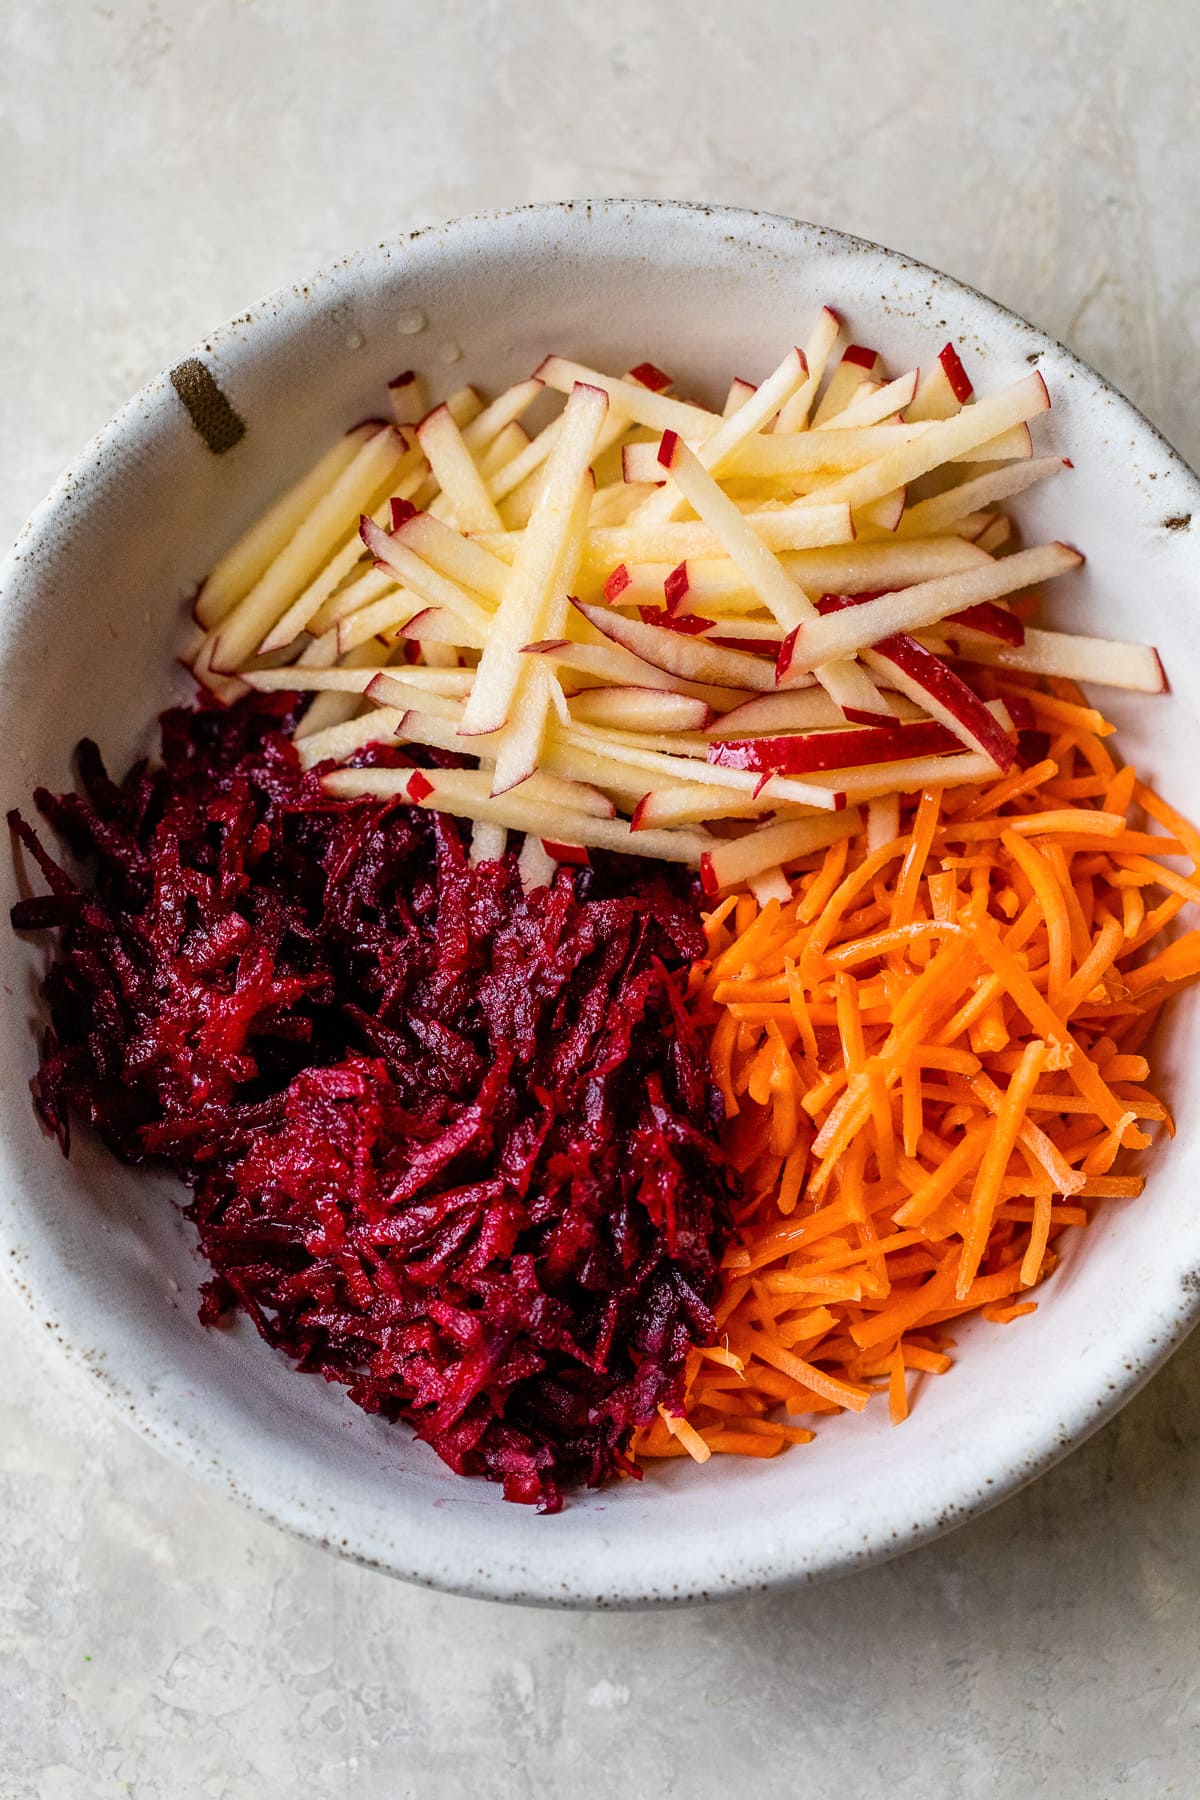 Raw Beet Salad with Carrots and Apples